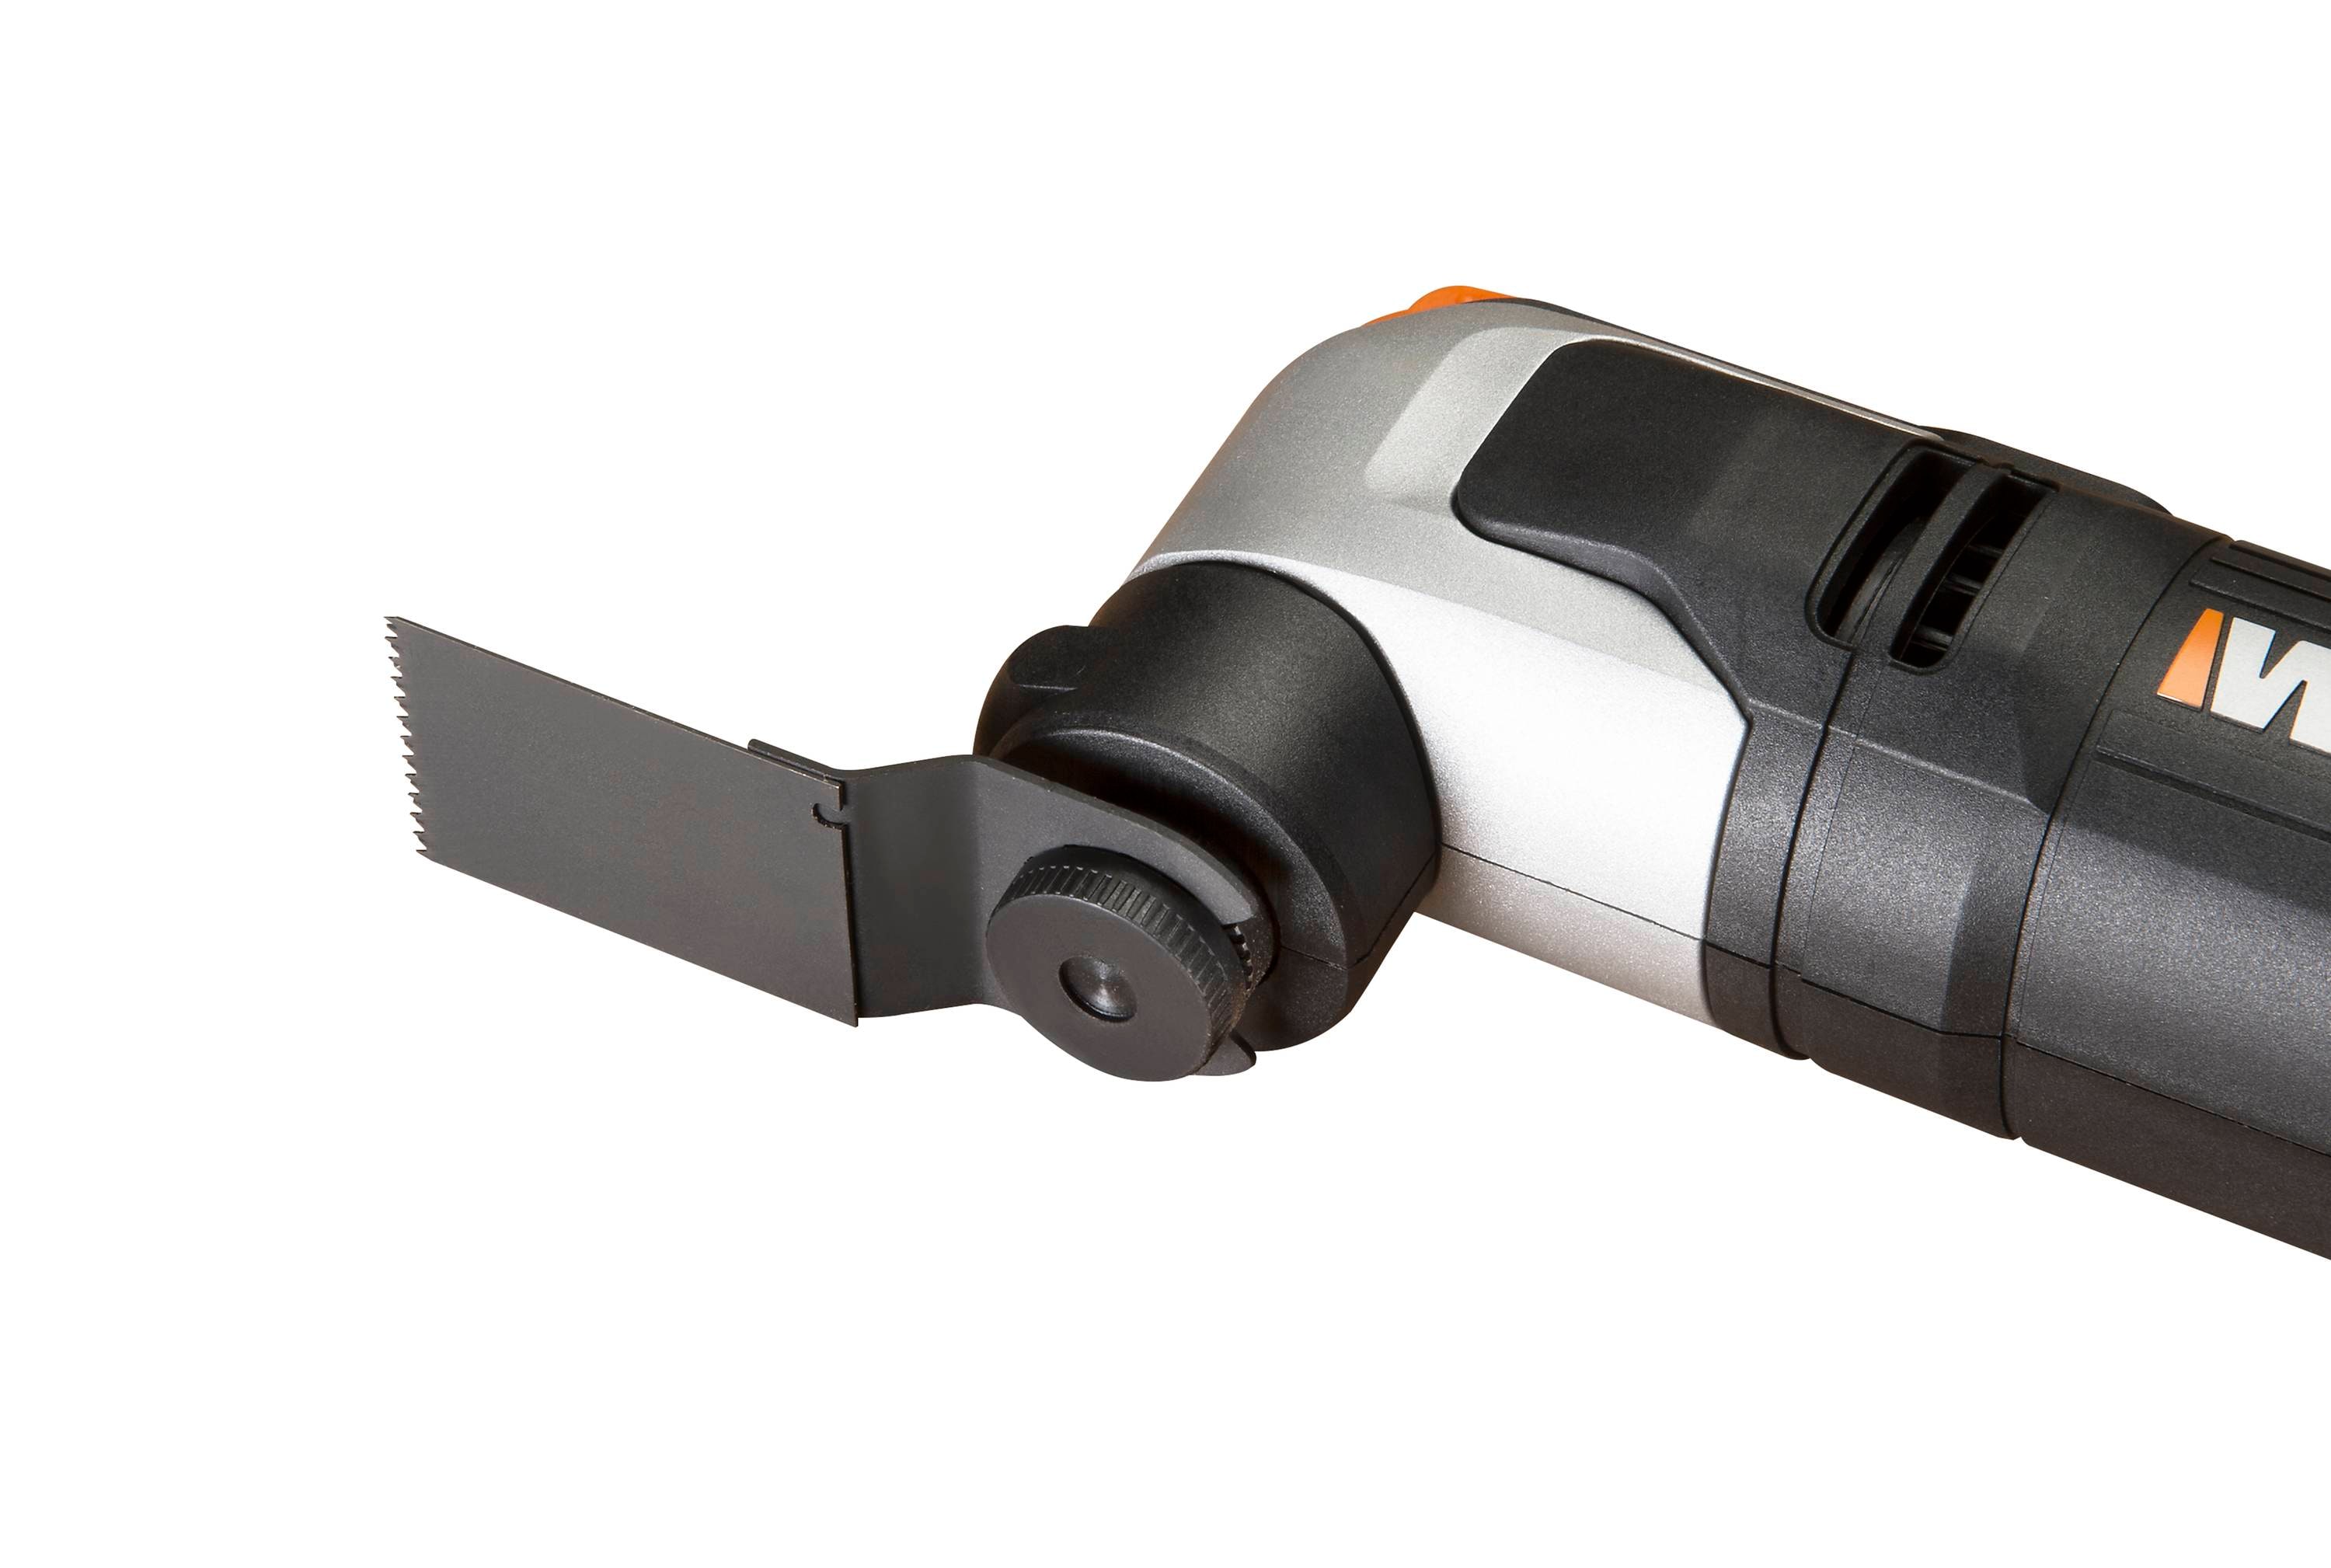 BLACK+DECKER Oscillating Multi-Tool, Variable Speed, 2.5-Amp Review 